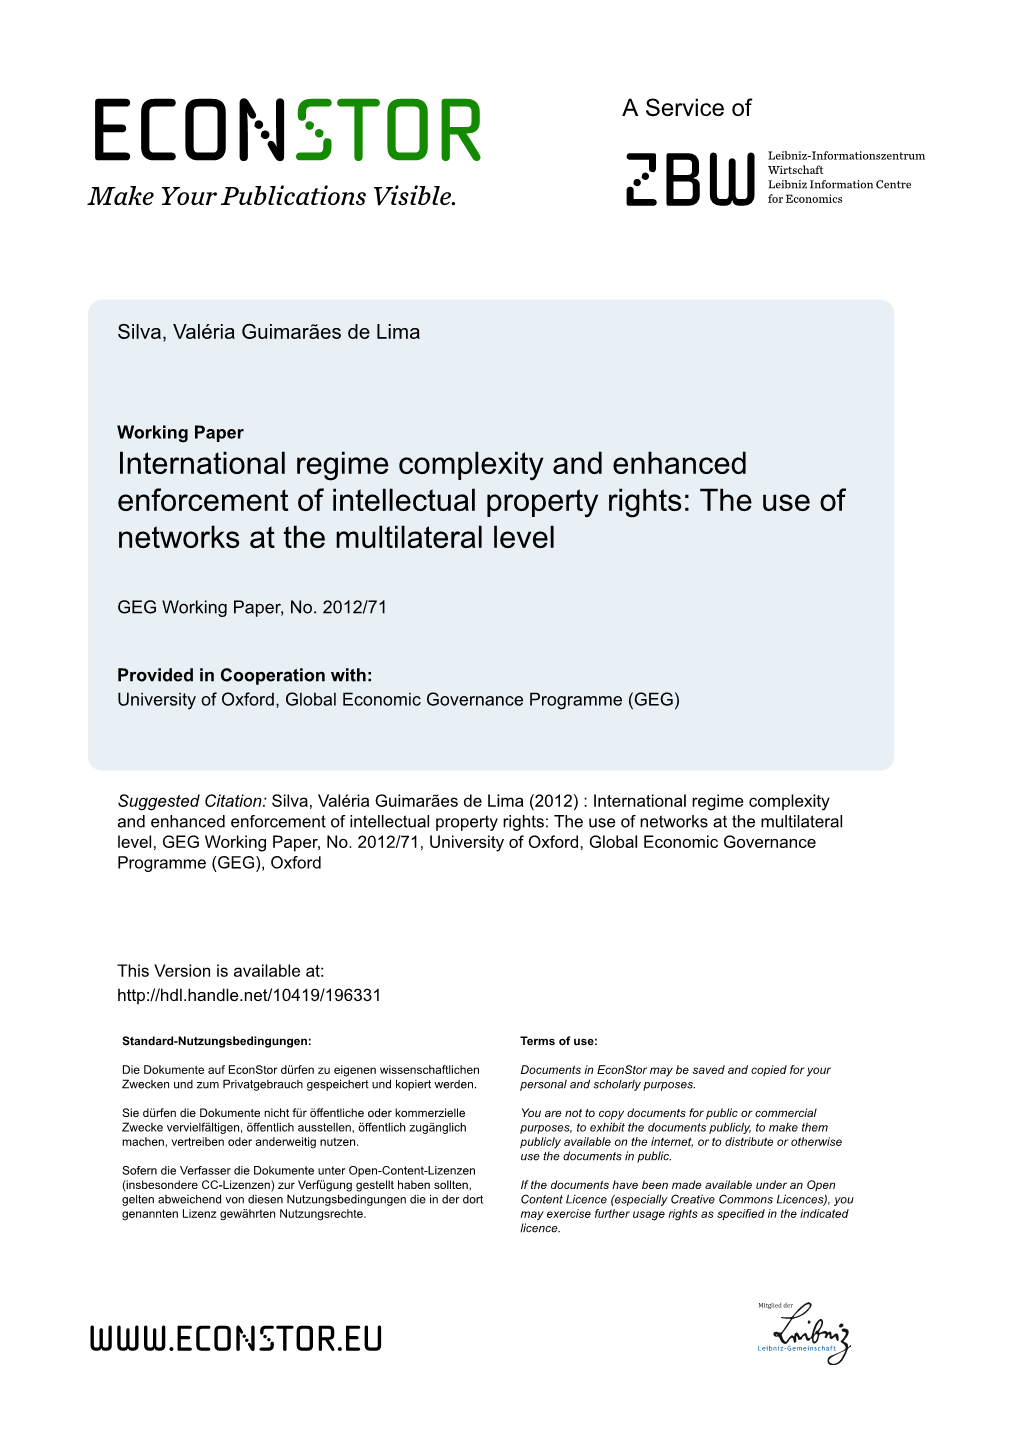 International Regime Complexity and Enhanced Enforcement of Intellectual Property Rights: the Use of Networks at the Multilateral Level